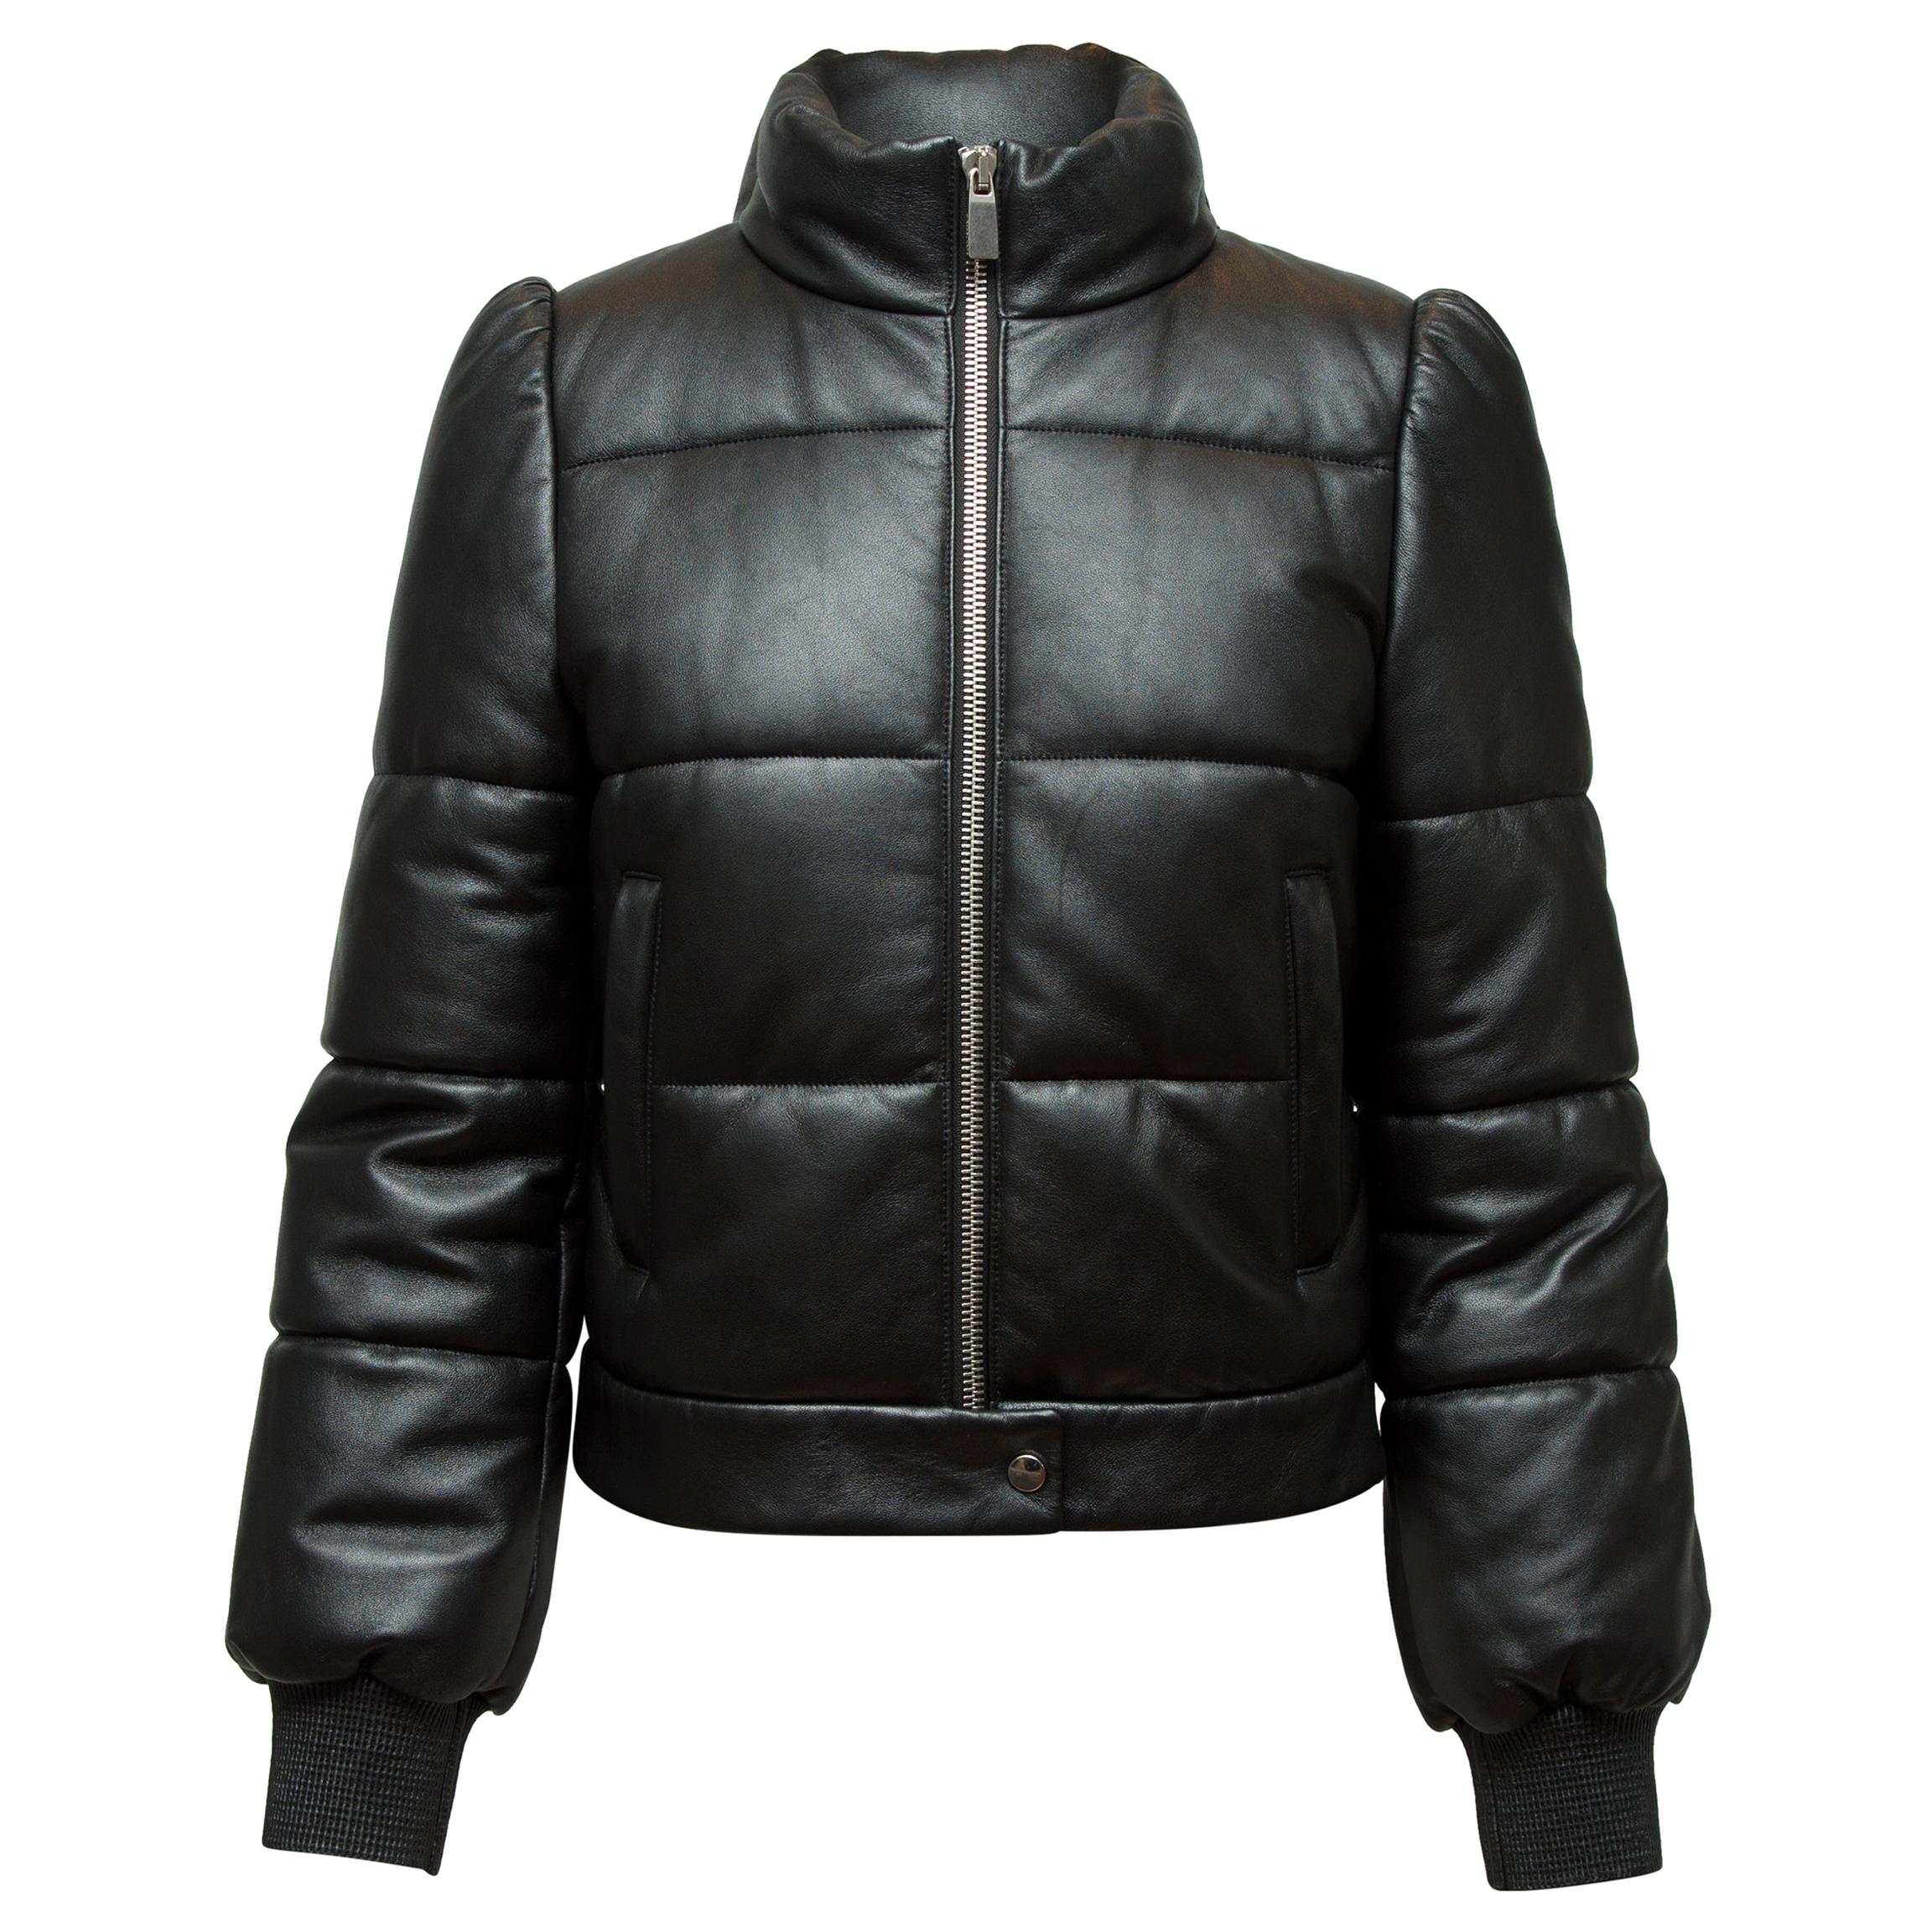 Michael Kors Black Collection Leather Puffer Jacket